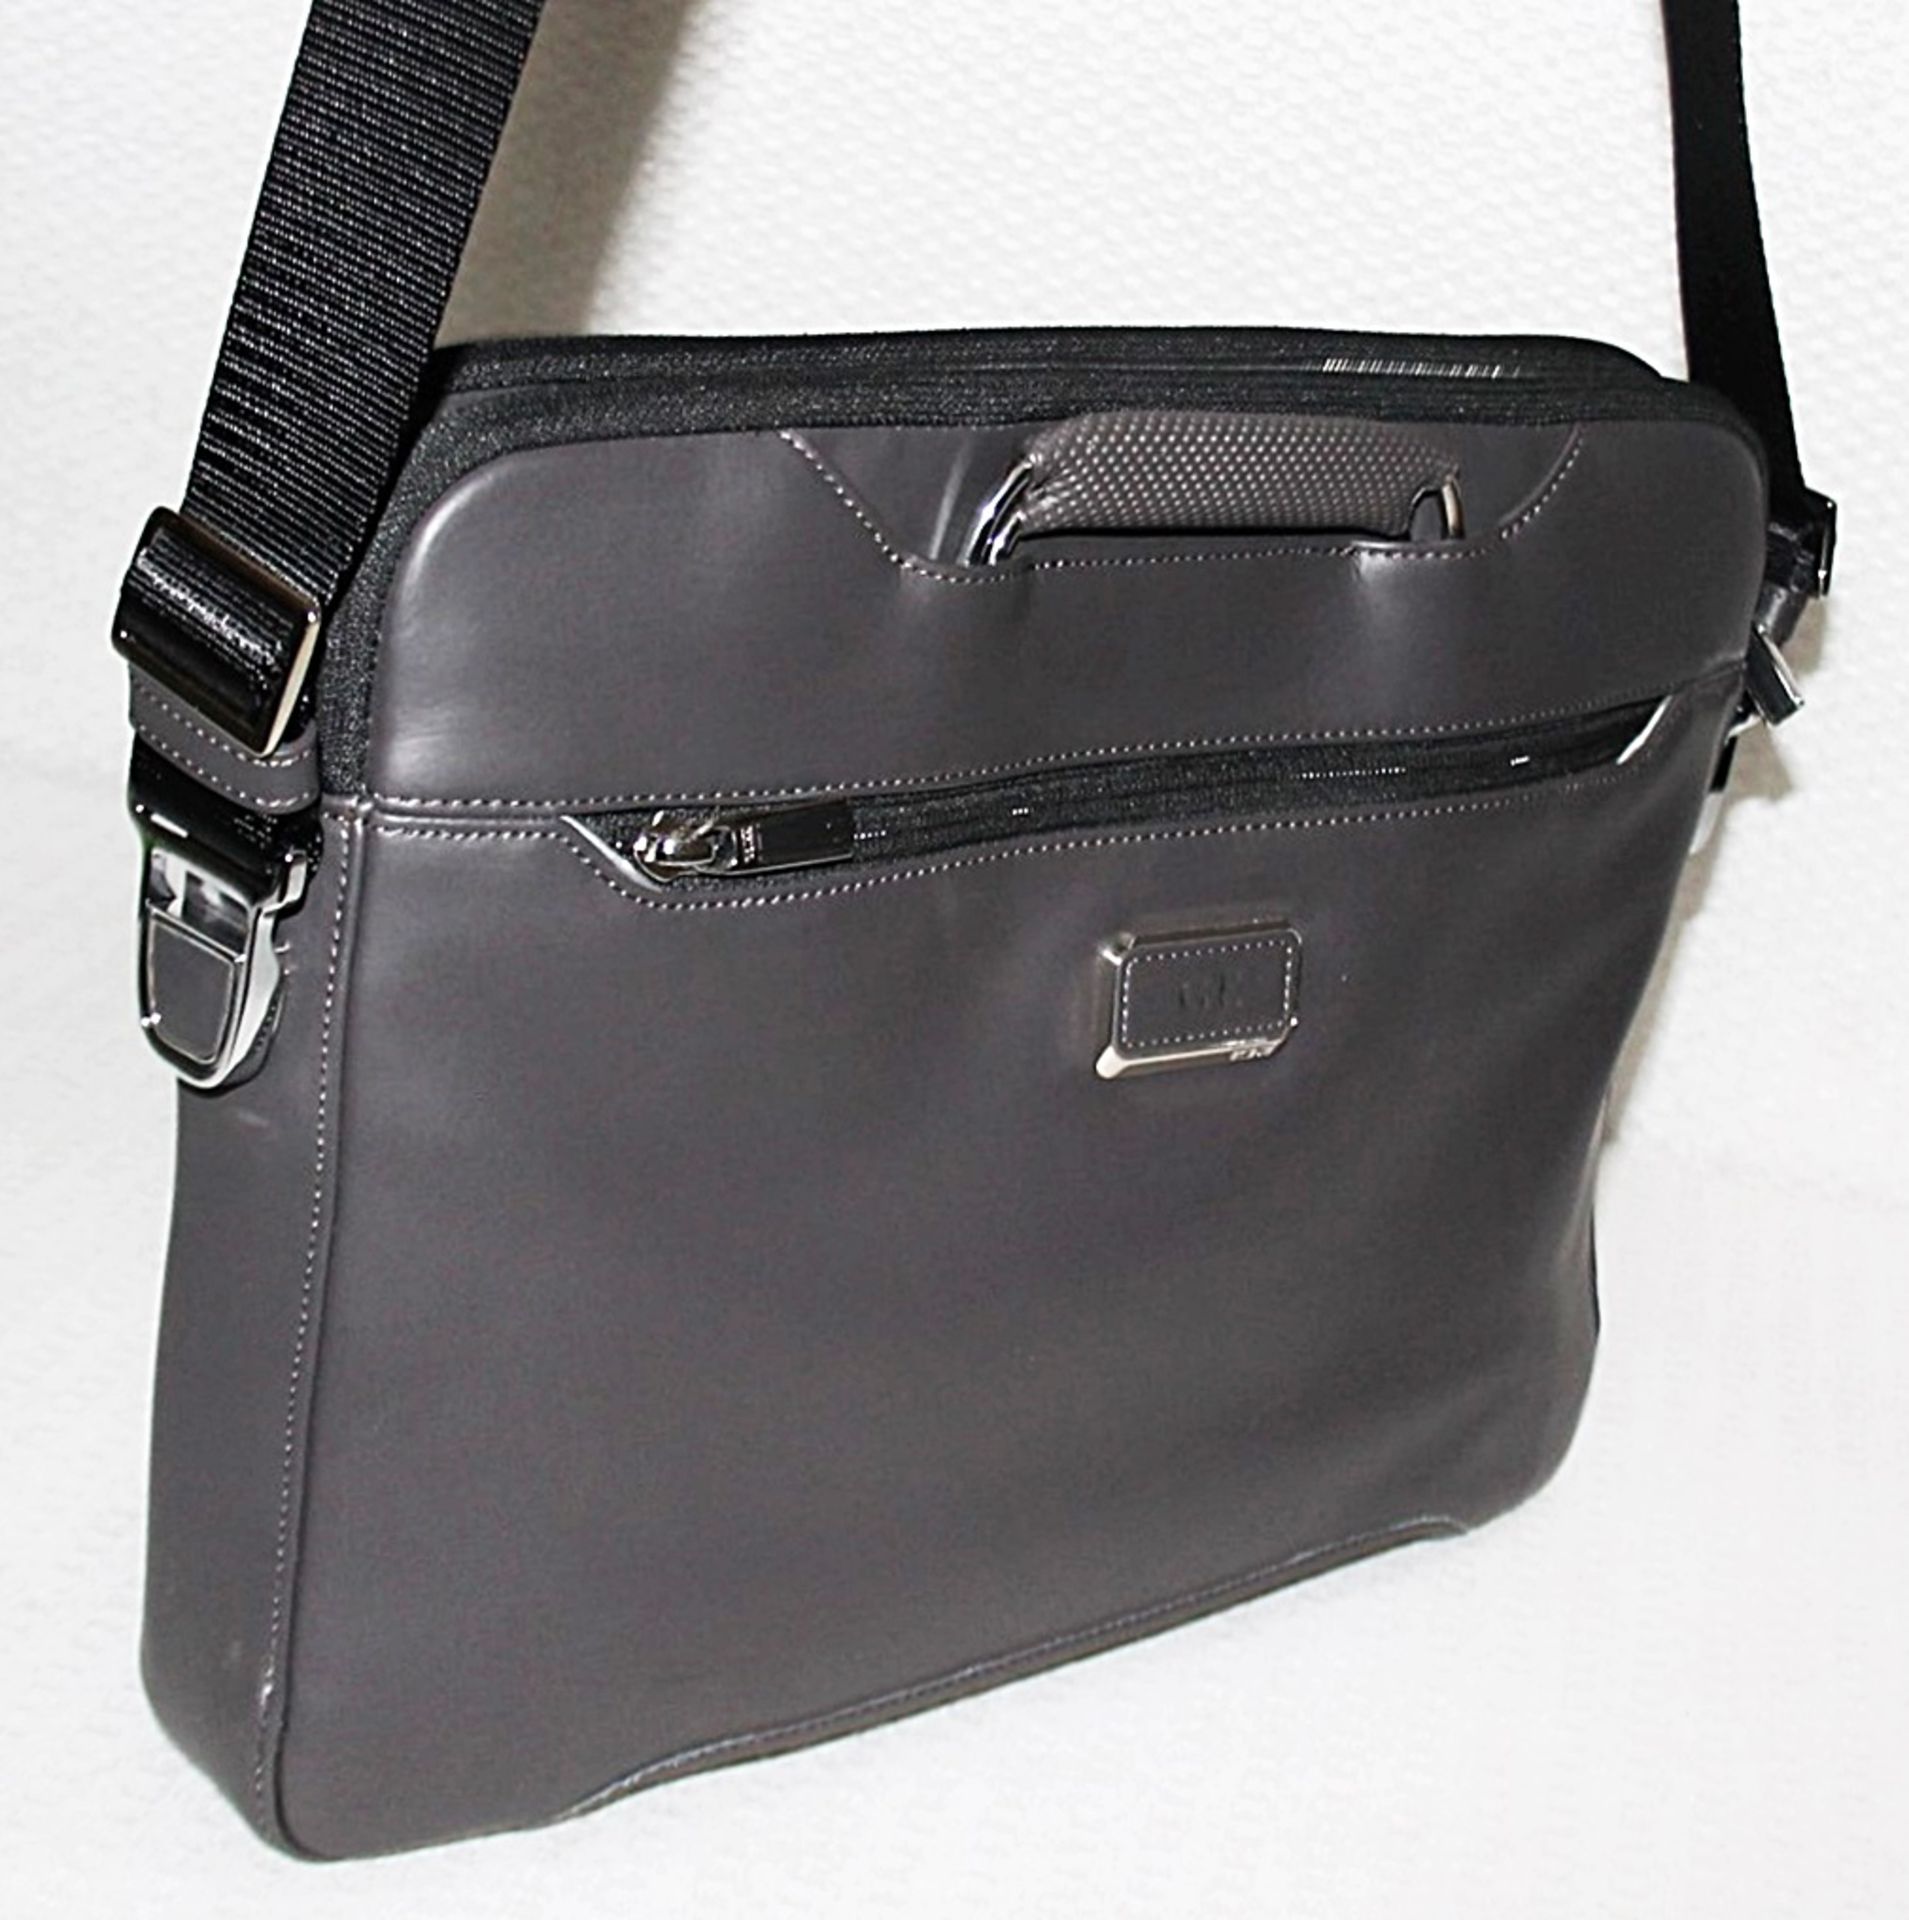 1 x TUMI Luxury Leather Slim Brief Case With Strap In A Taupe / Gunmetal Grey - Original Price £745 - Image 7 of 14